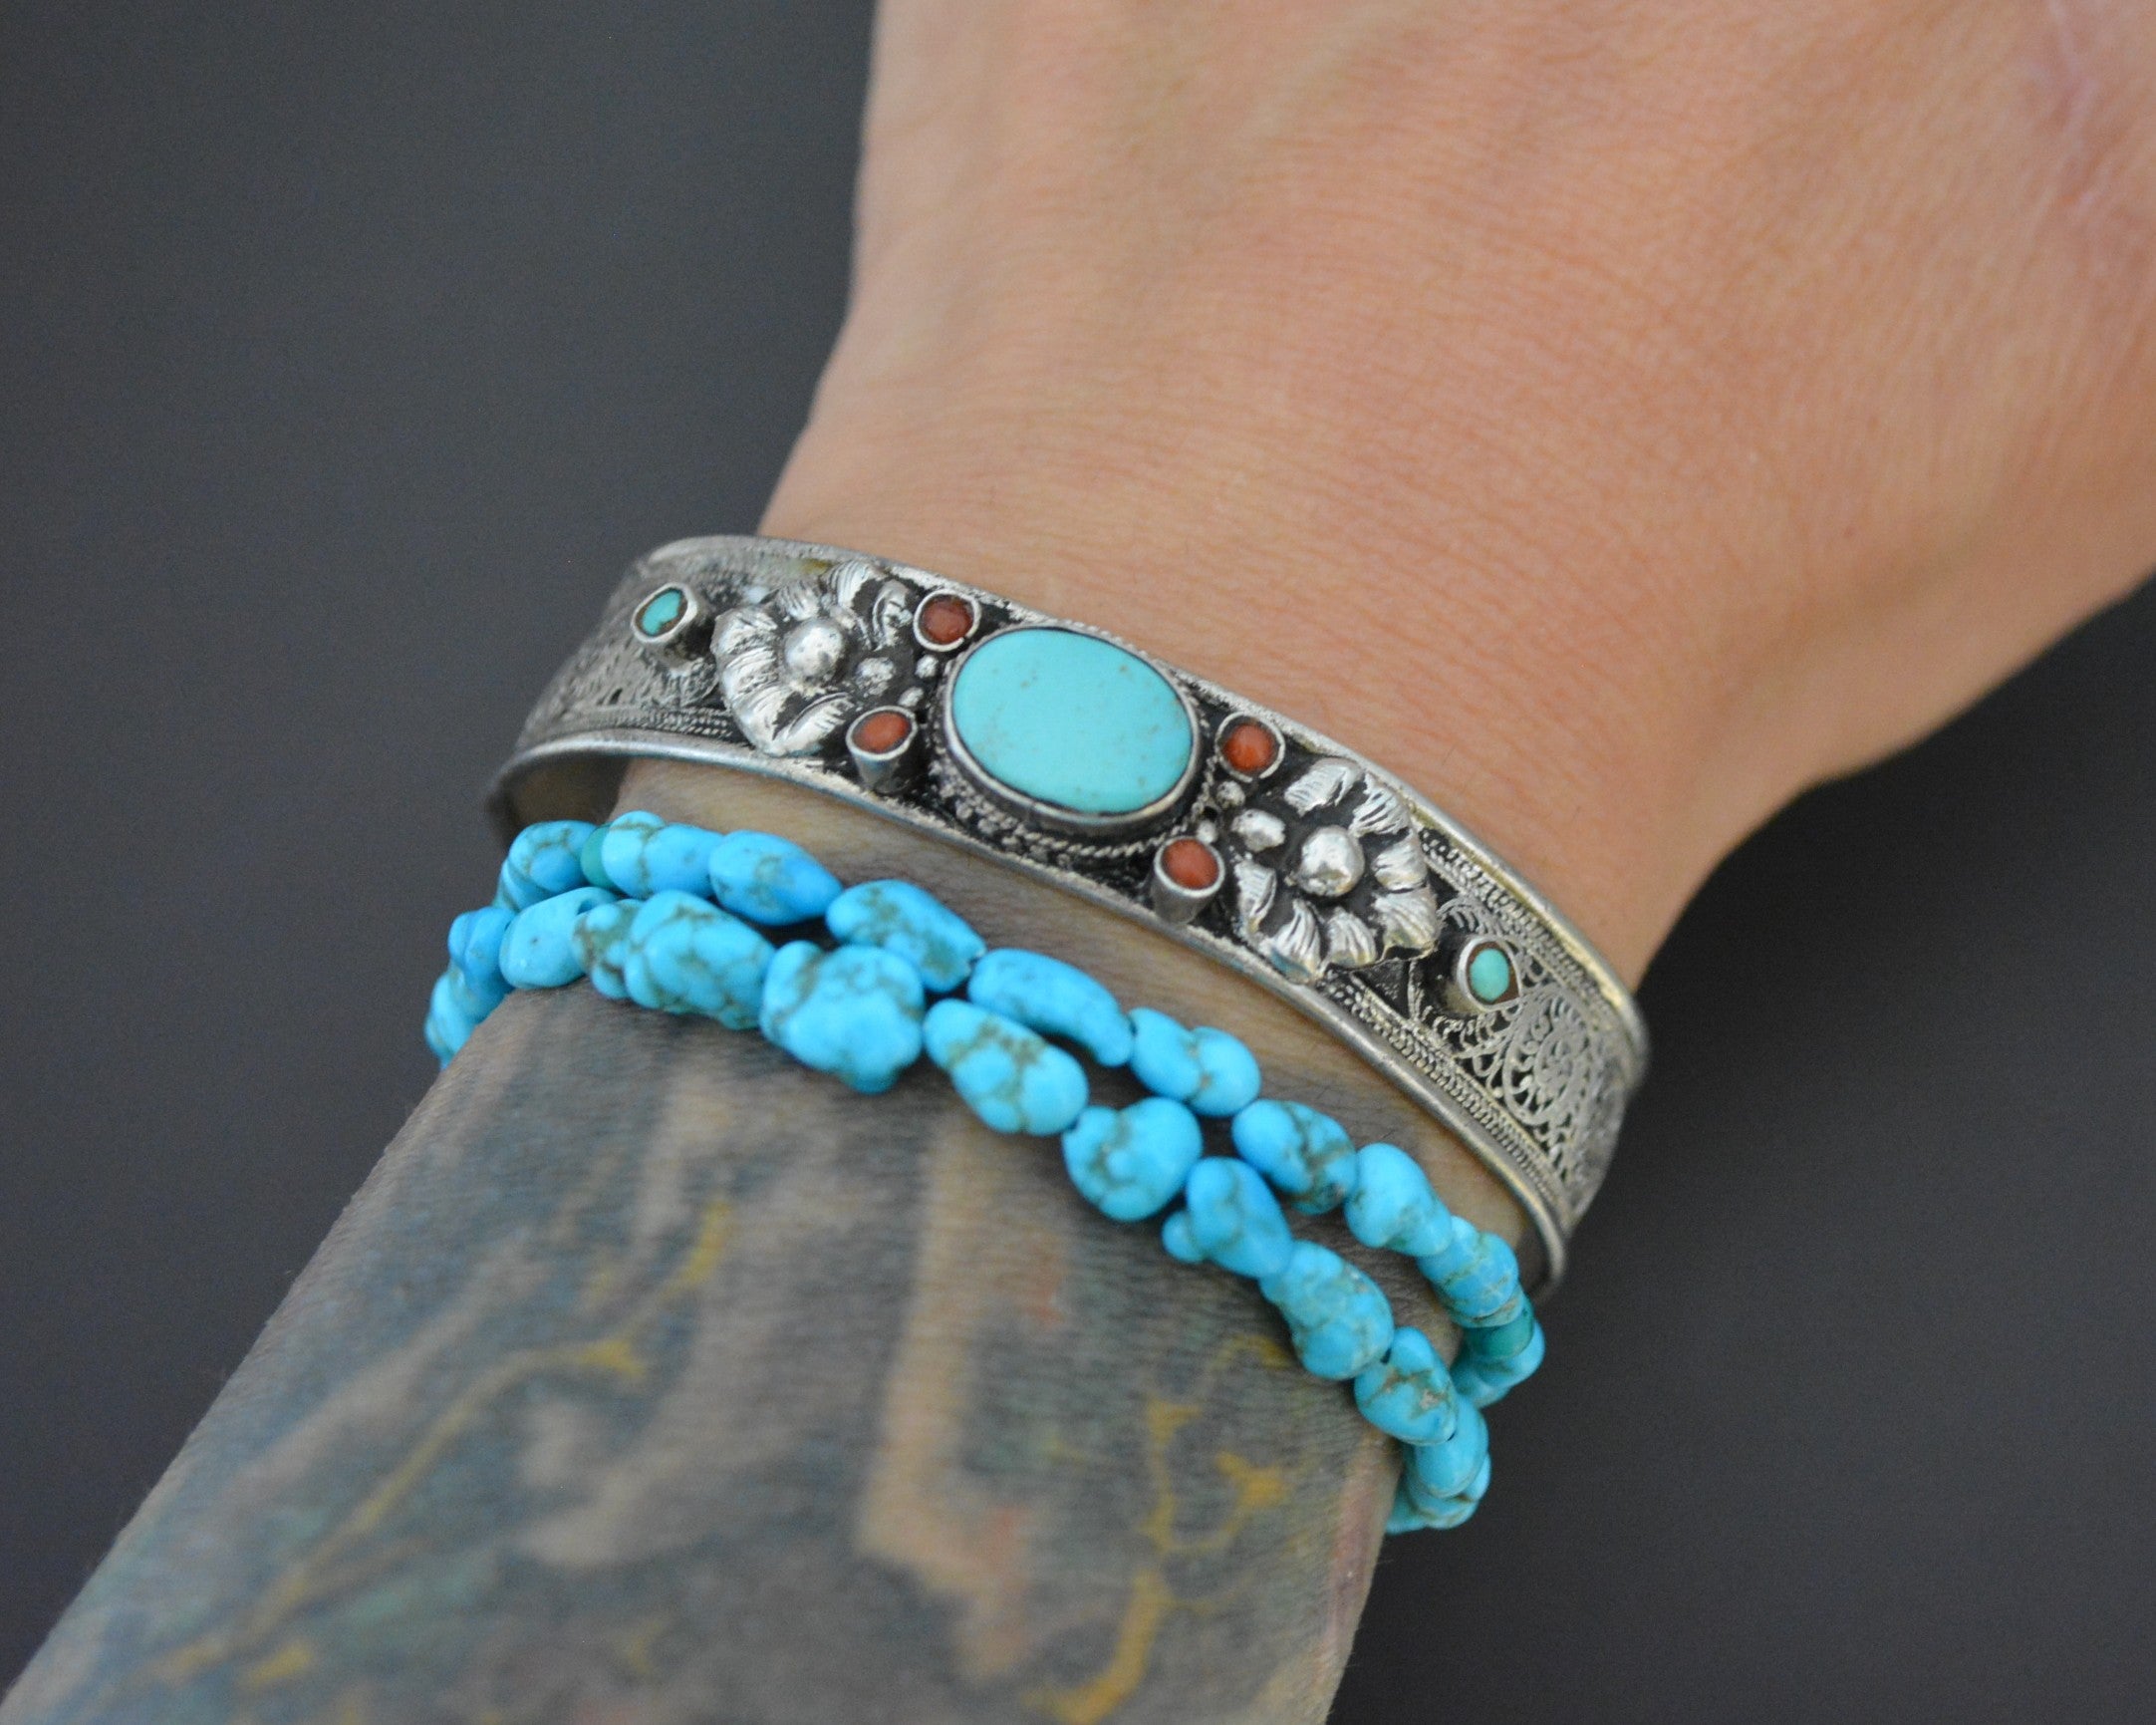 Nepali Turquoise Coral Cuff Bracelet with Filigree Work - SMALL